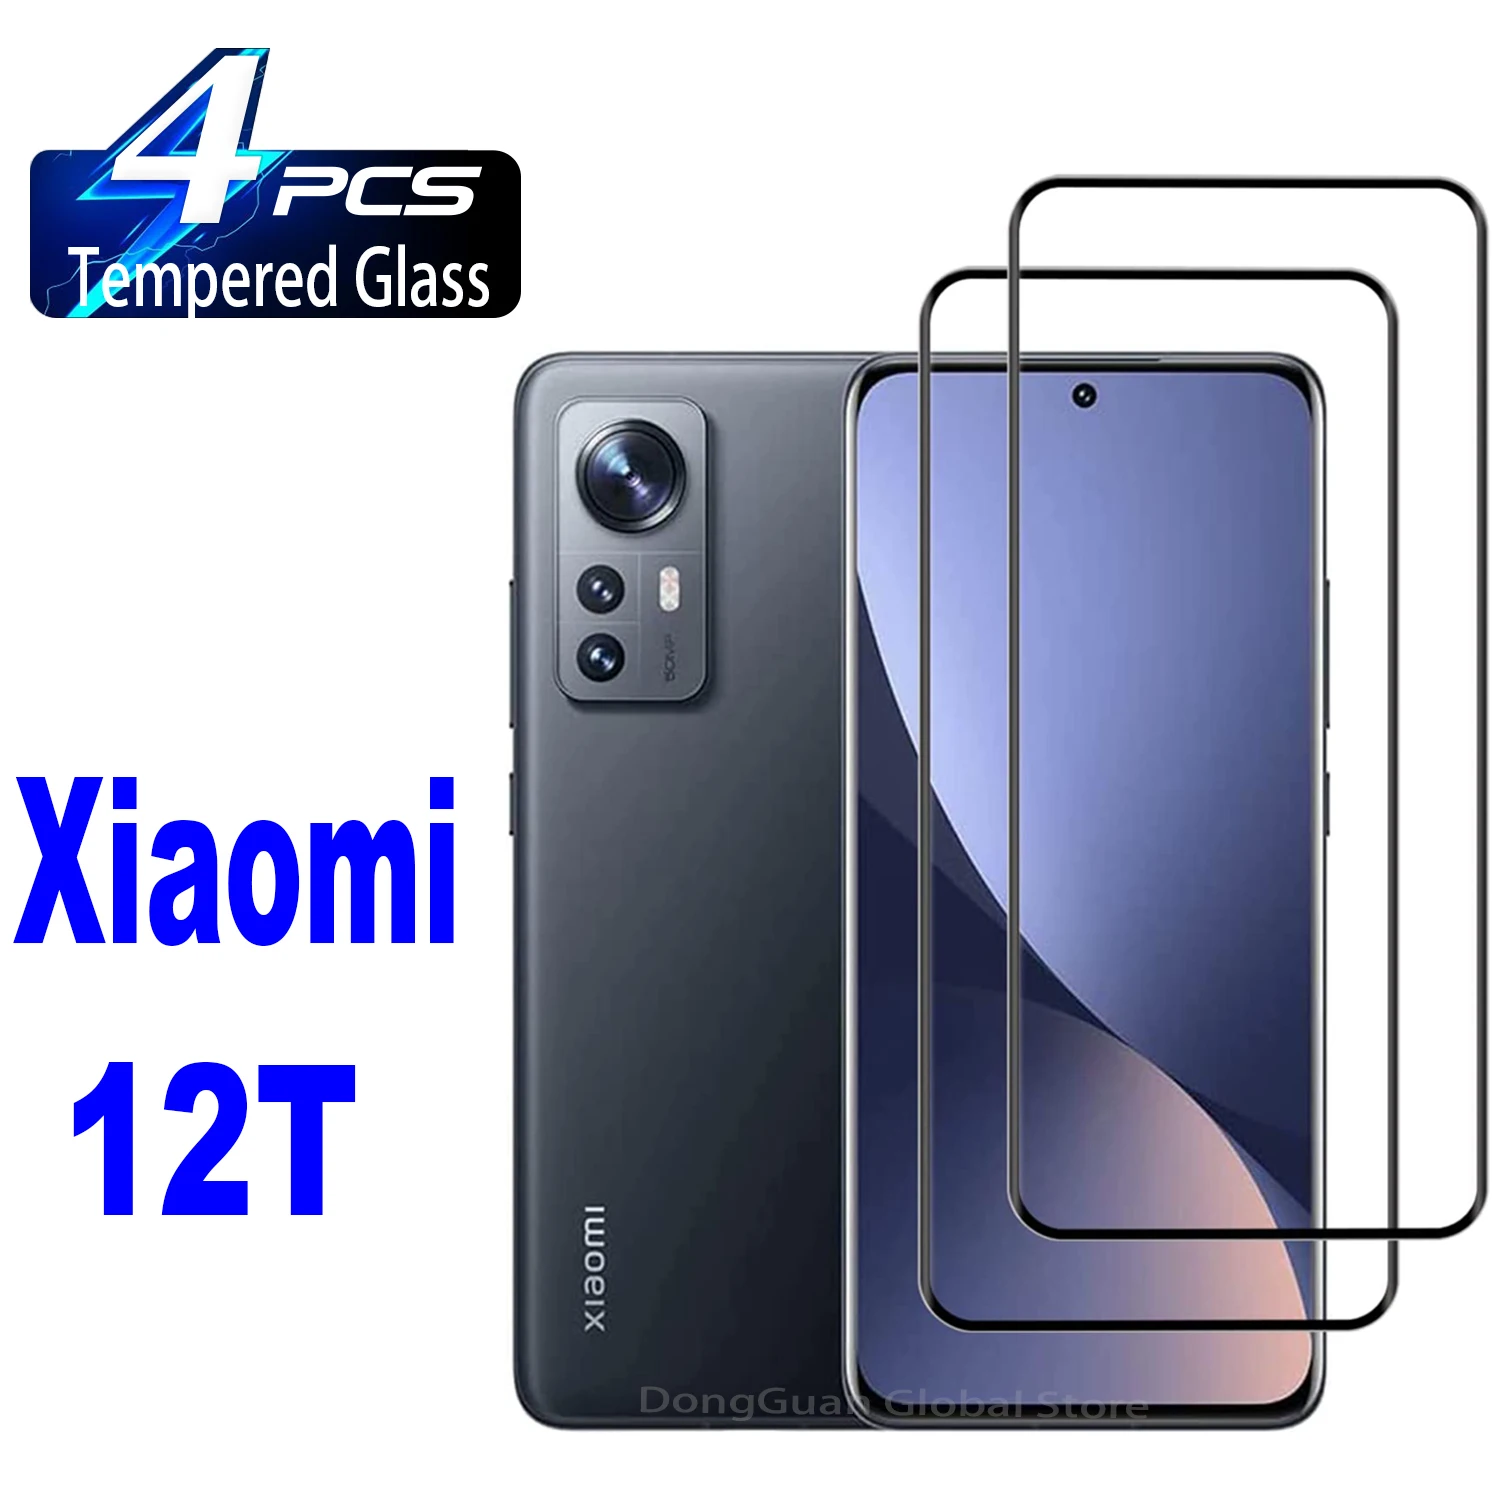 2/4Pcs Tempered Glass For Xiaomi 12T Pro Screen Protector Glass Film for xiaomi mi 11t pro glass screen protector film for xiaomi mi 11t pro tempered glass for xiaomi 11t pro glass